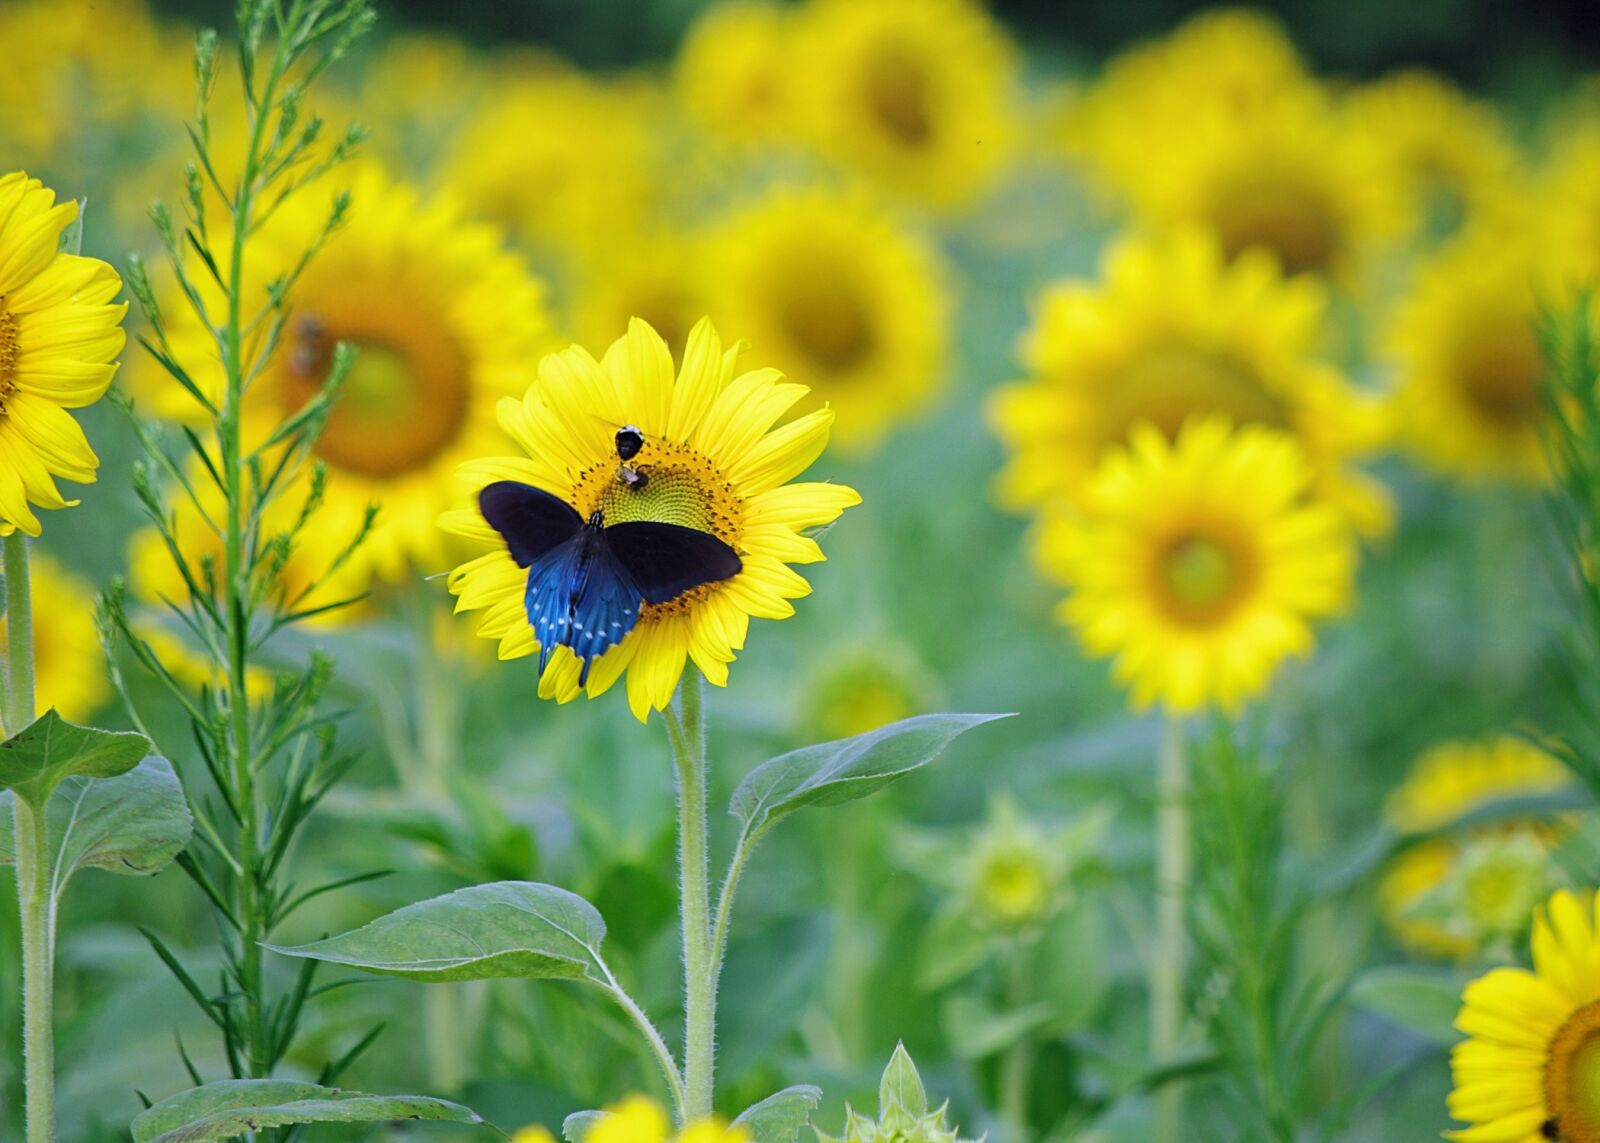 Pentax K-7 sample photo. Butterfly, sunflowers, blue photography